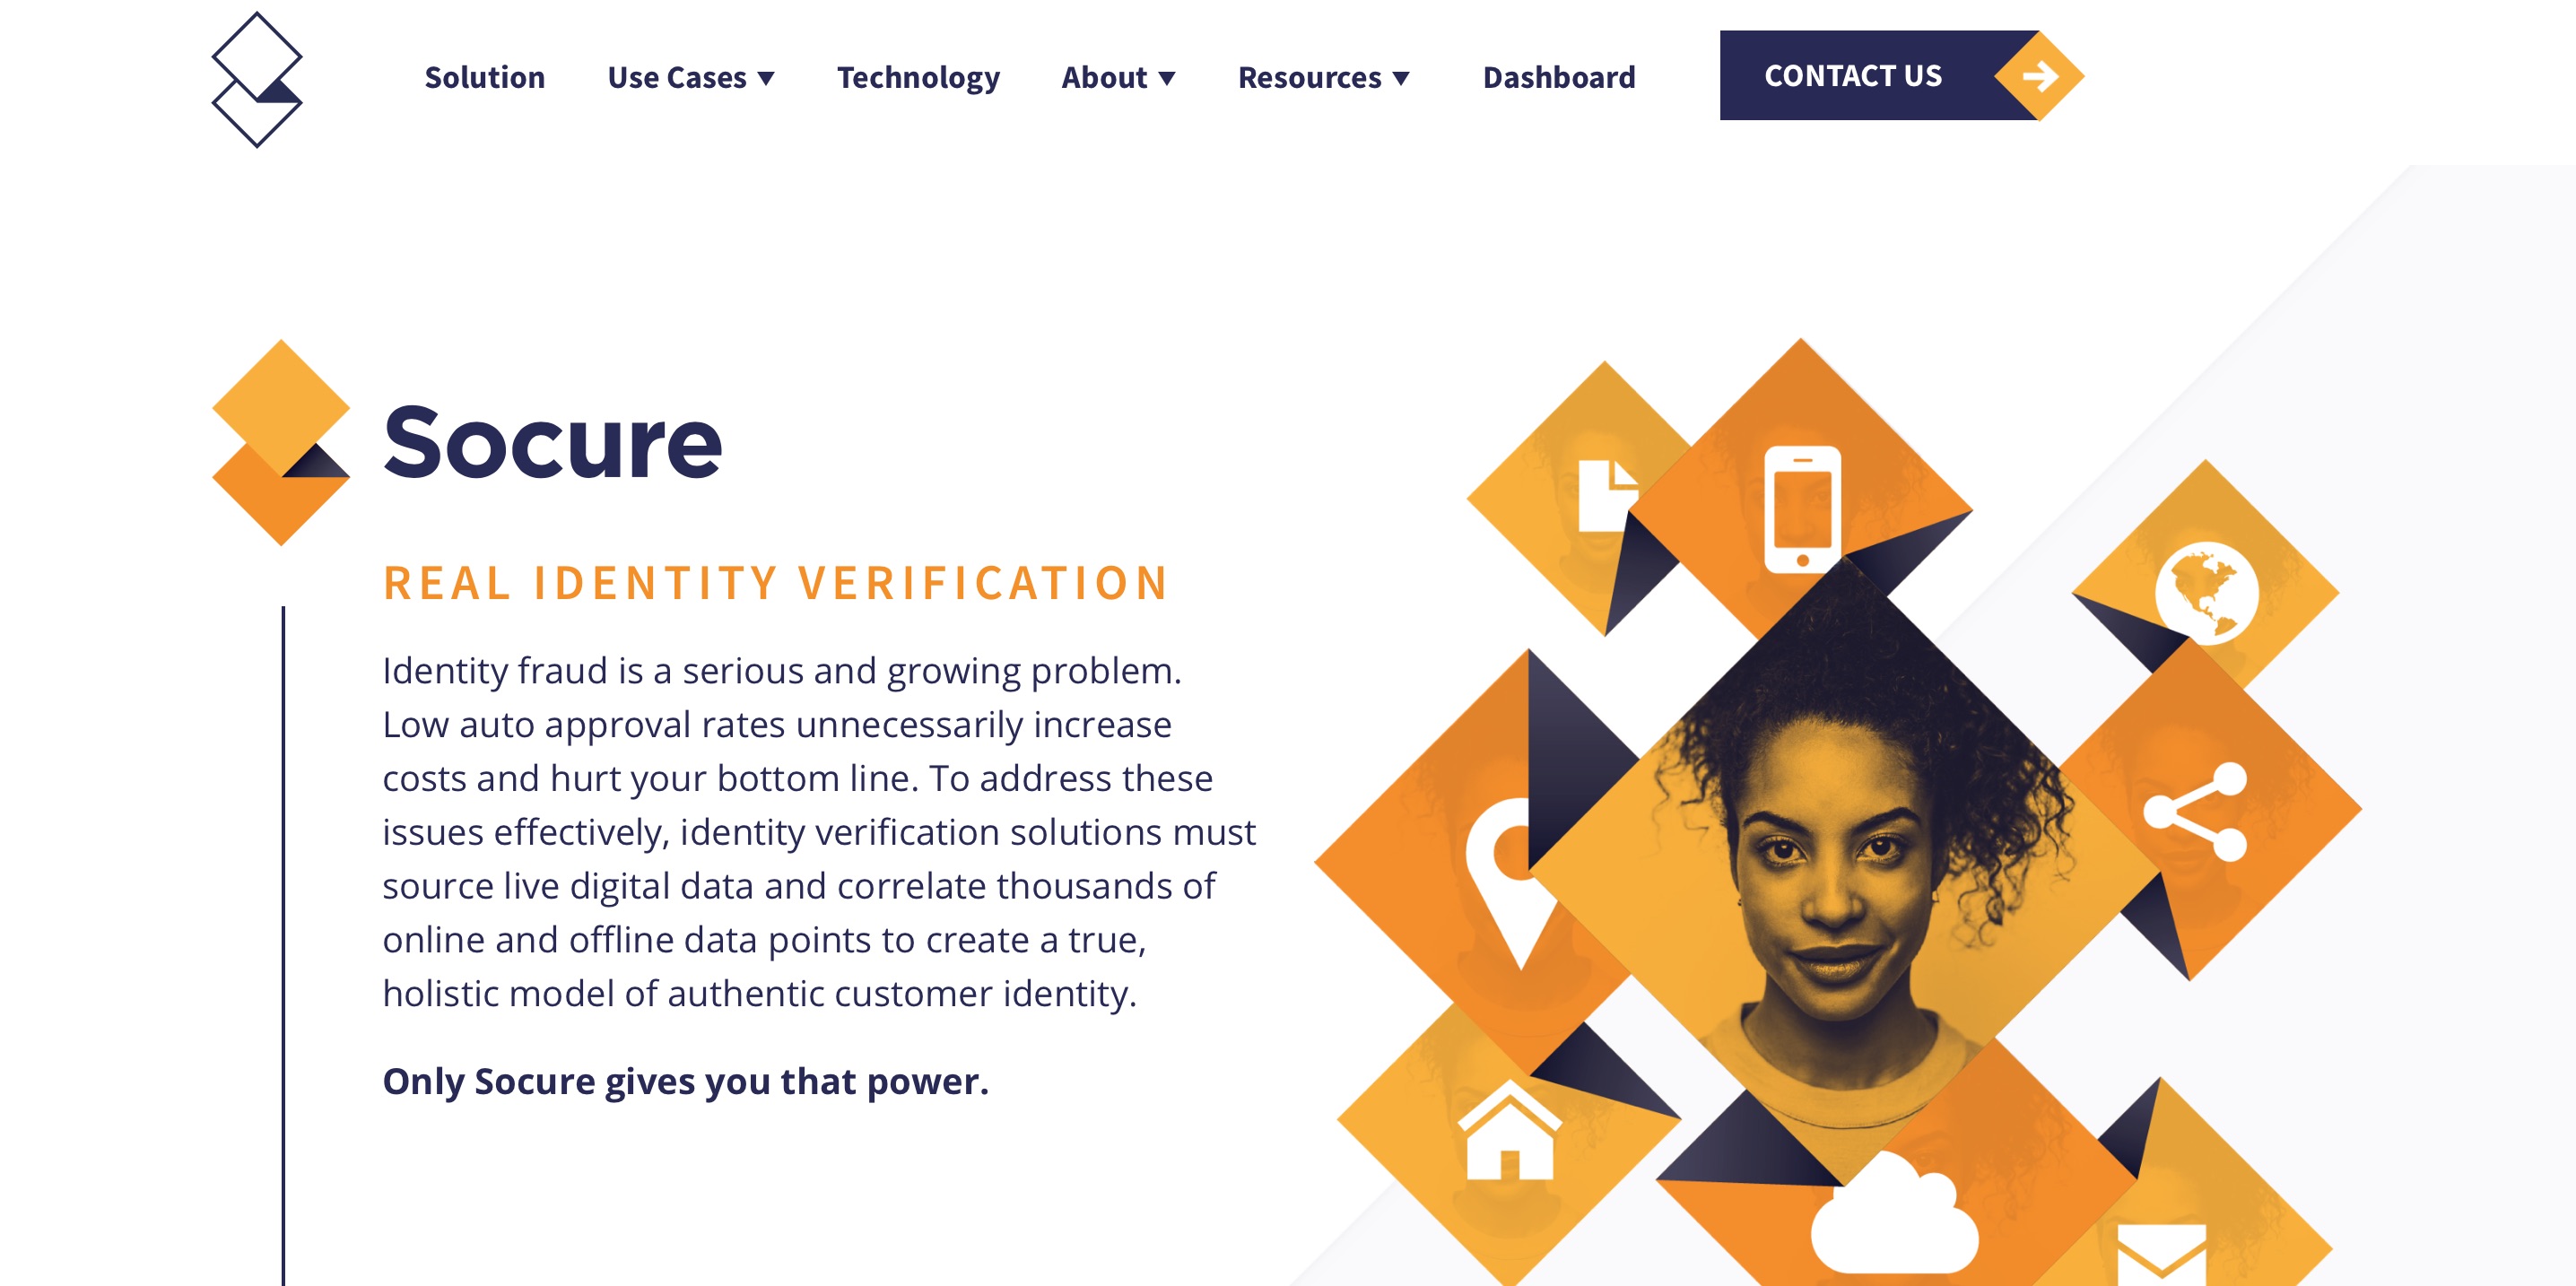 Socure raises $30 million to combat identity fraud with machine learning